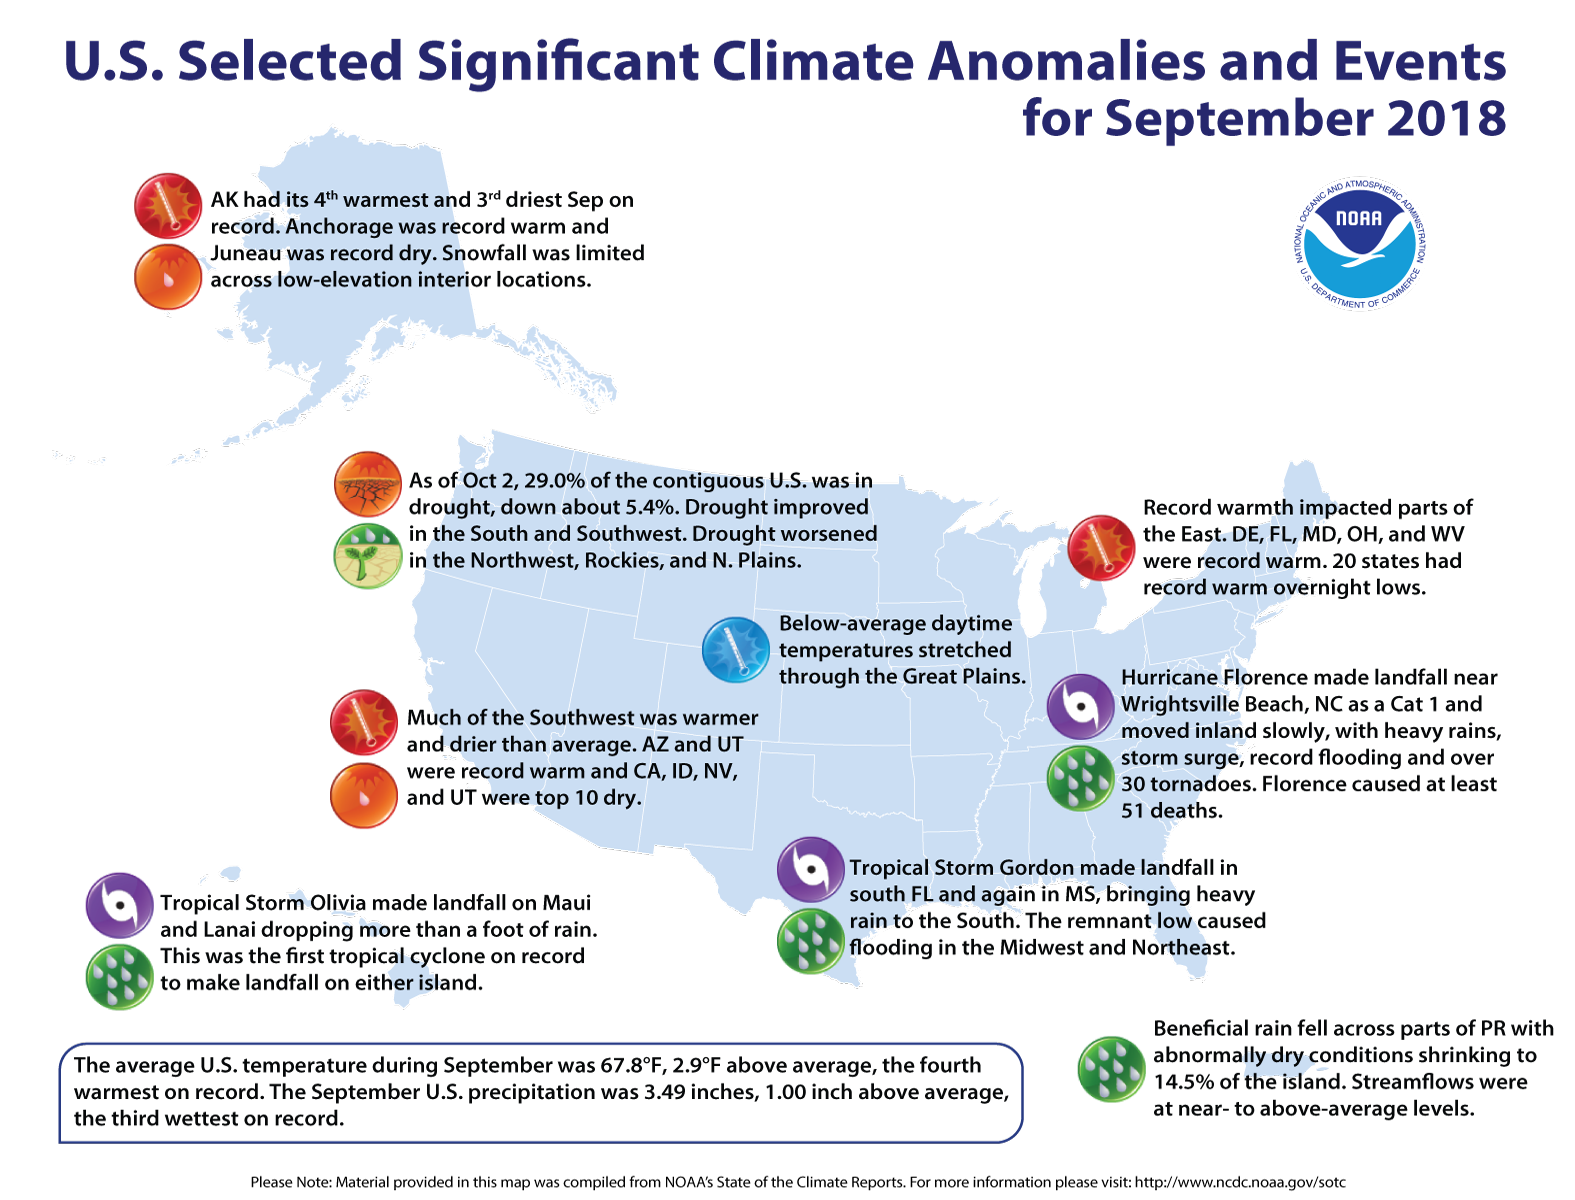 An annotated map of the United States showing notable climate events that occurred in September 2018. For details, see the bulleted list below in our story and online at http://bit.ly/USClimate201809.